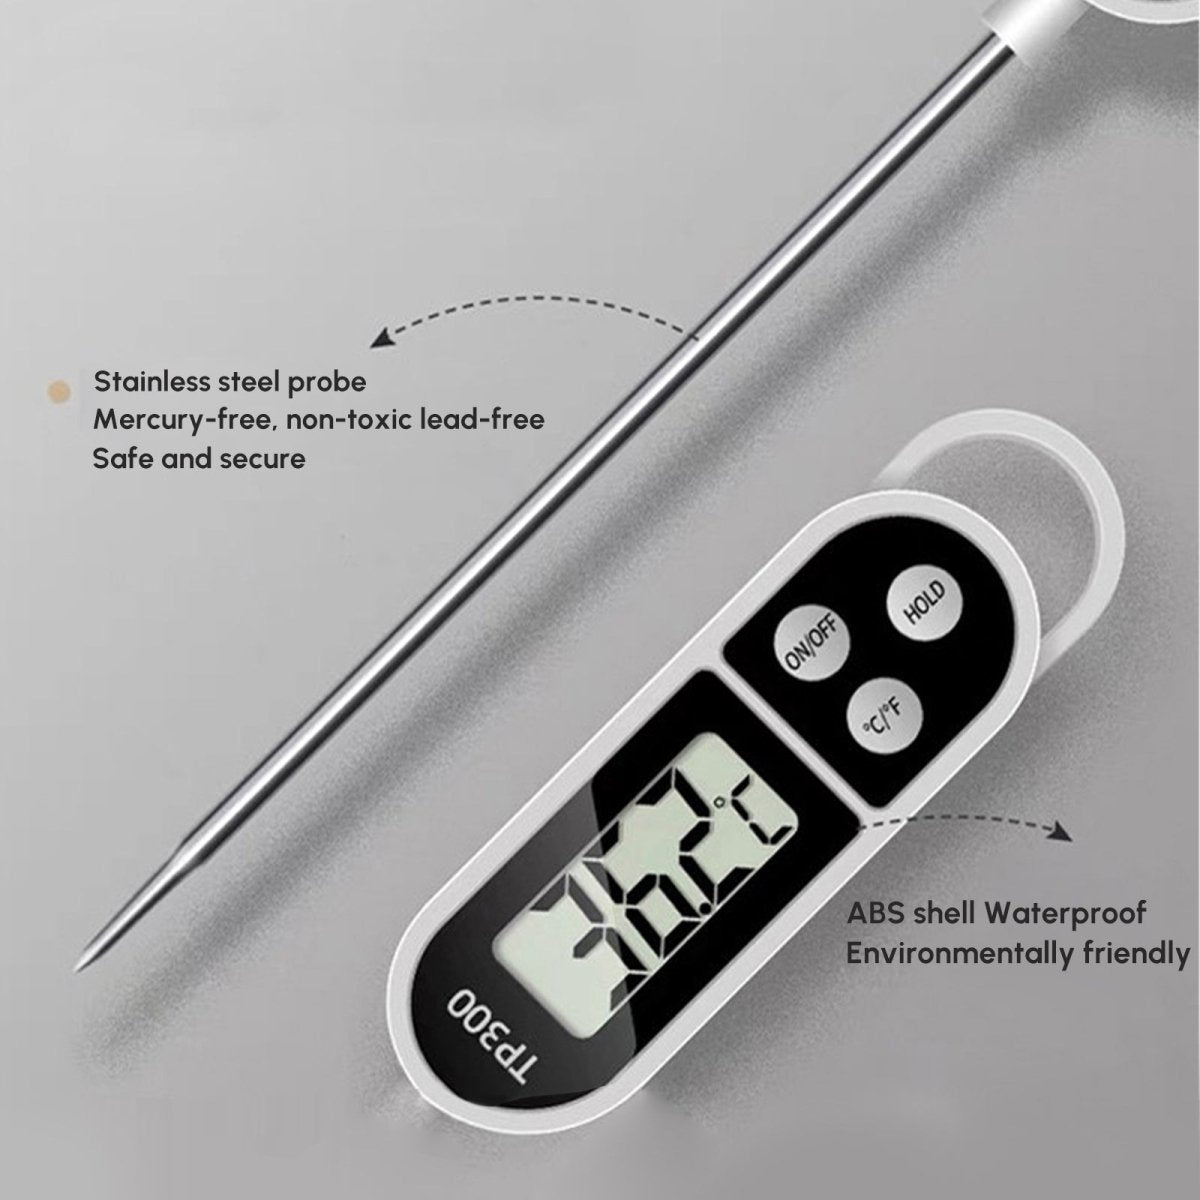 Instant Read Digital Grill Kitchen Meat Thermometer Probe BBQ Oven - Taplike